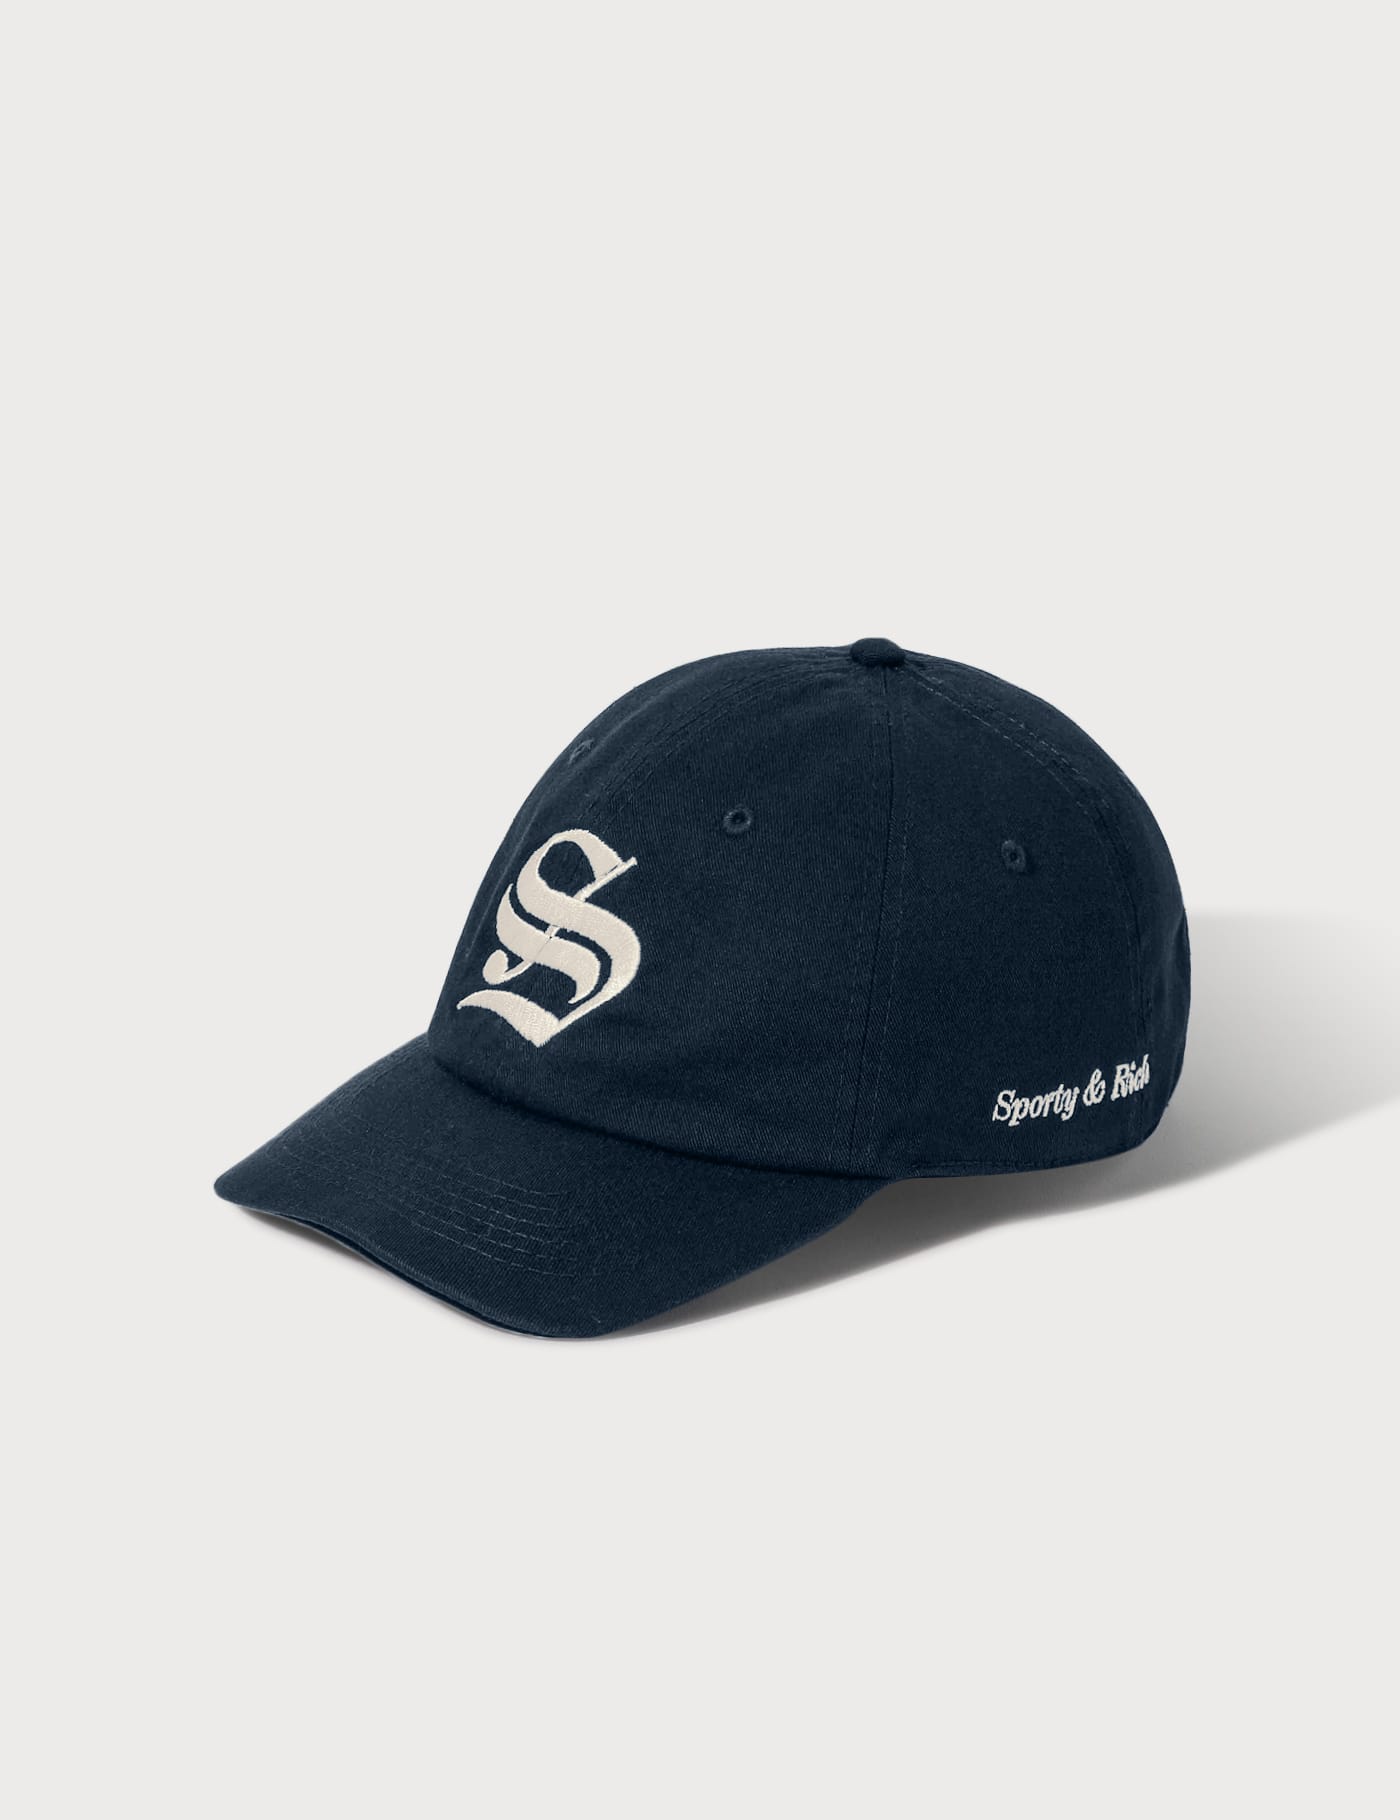 Sporty & Rich - Old English “S” Cap | HBX - Globally Curated 